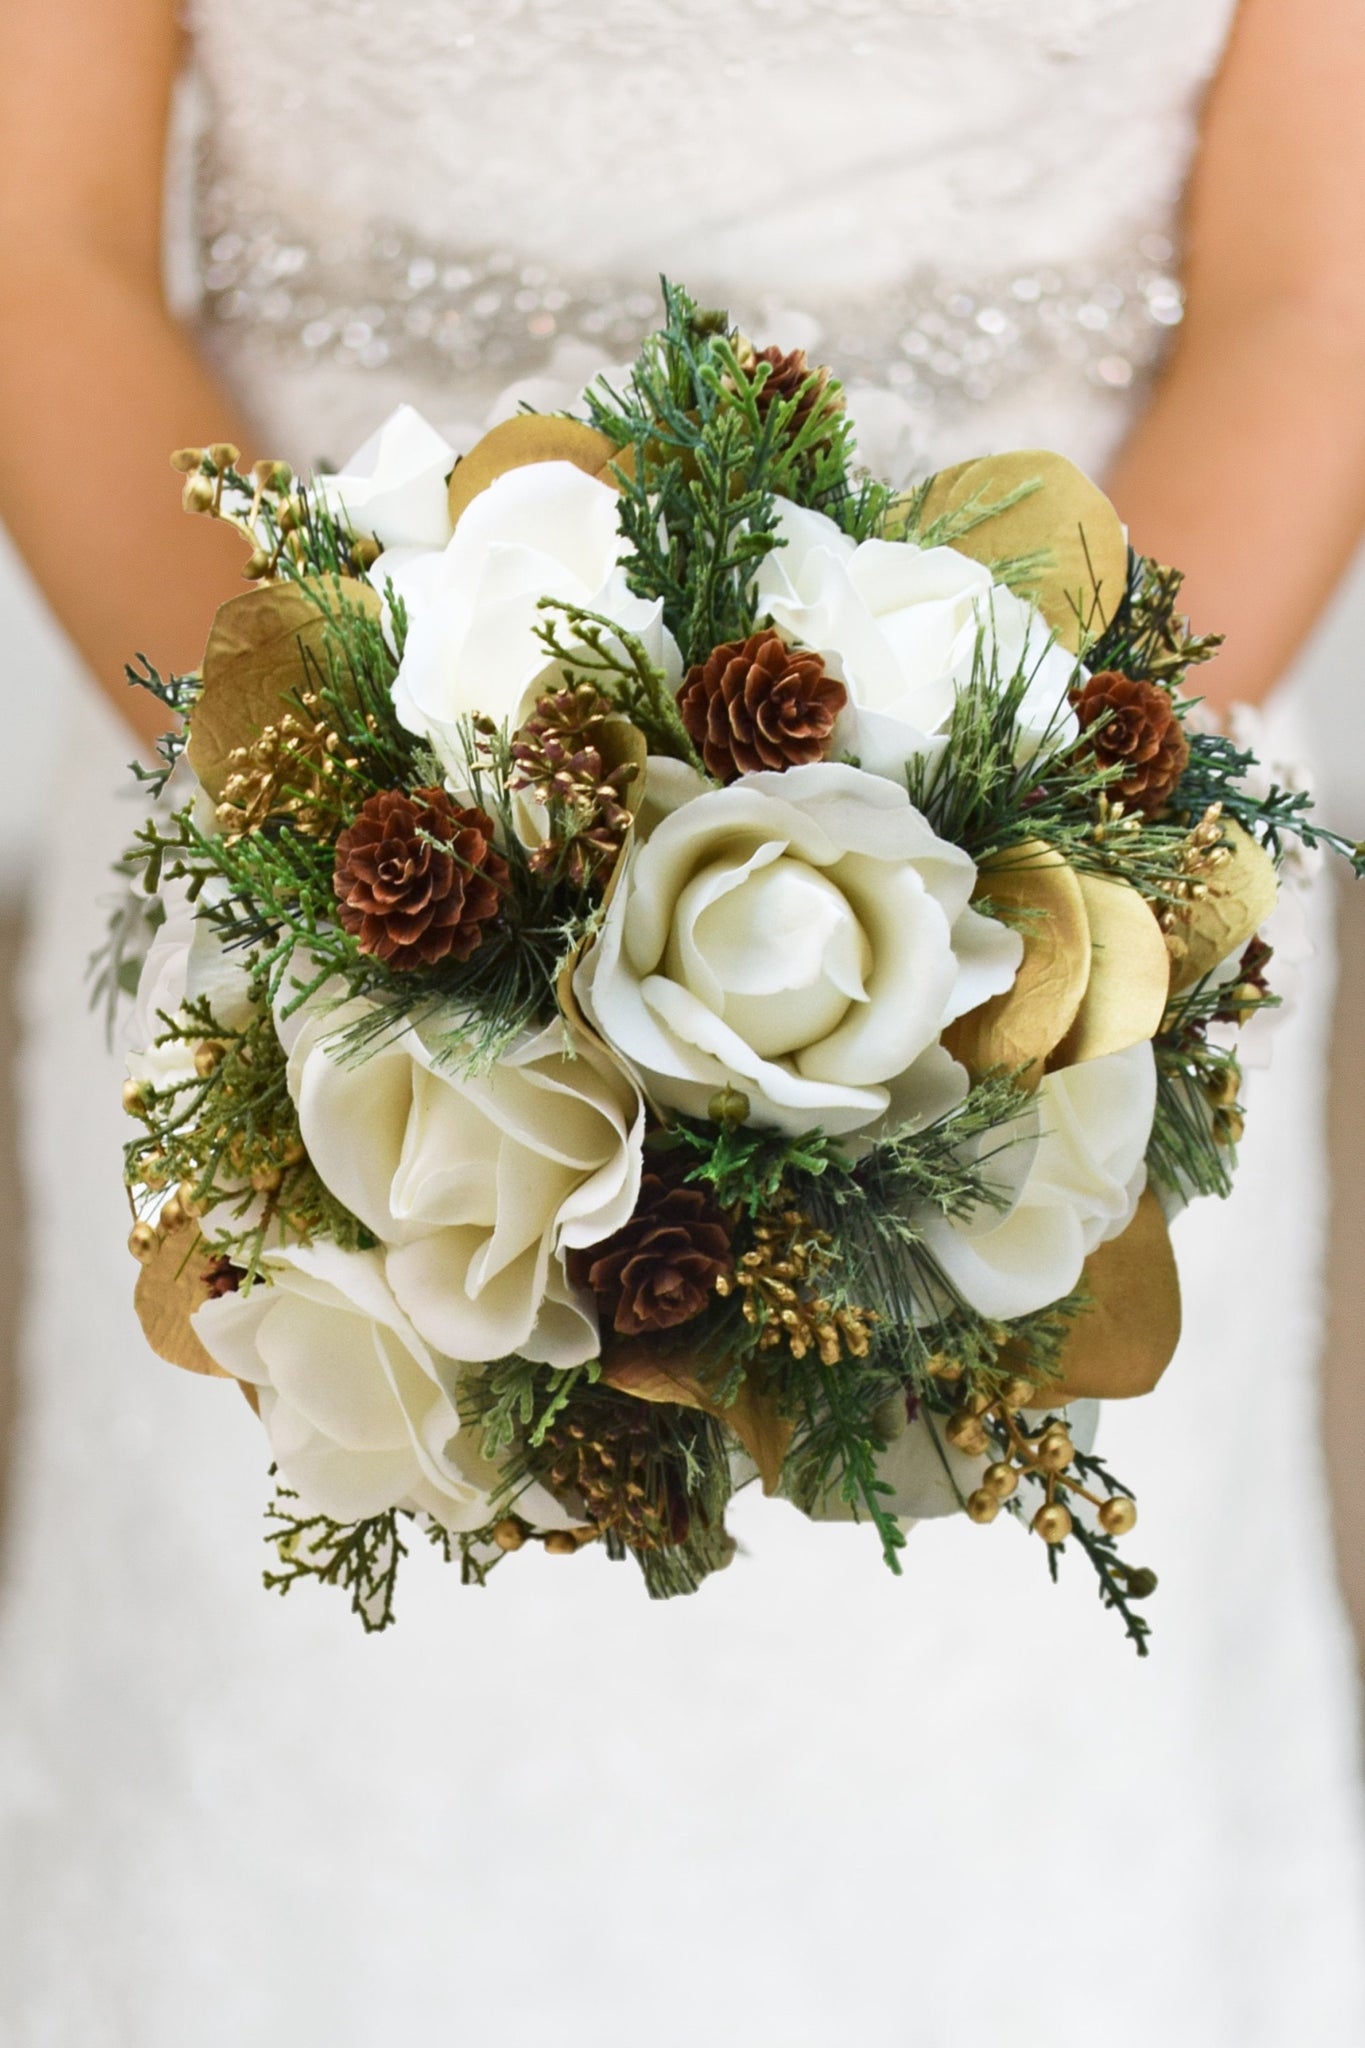 Cascade Winter Wedding Bridal Bouquet Evergreens Gold White Bouquet Eucalyptus Pine Cones Real Touch Roses - add Groom's Boutonniere & More!